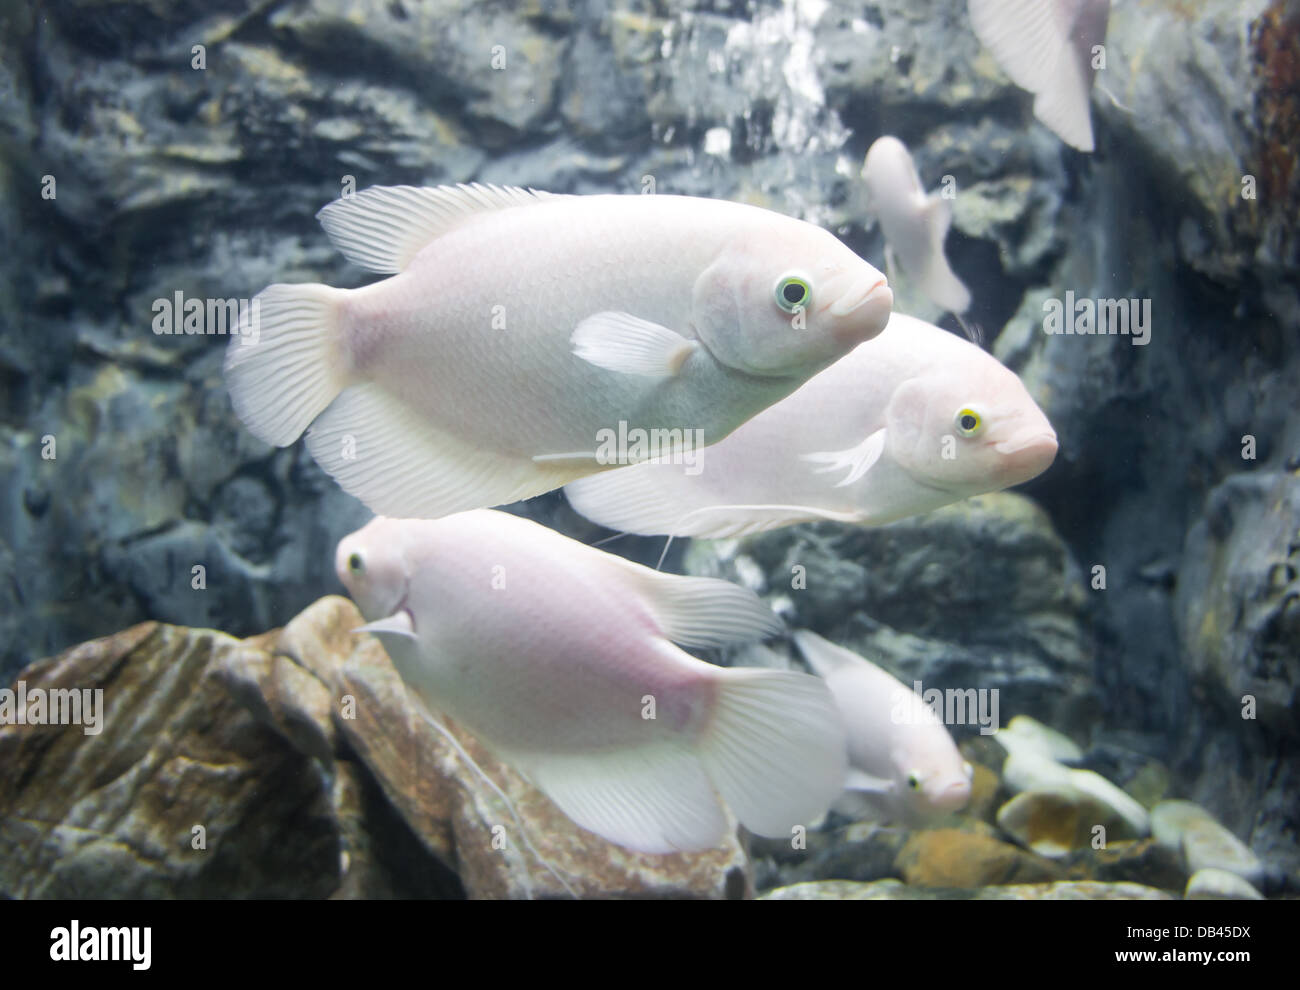 A group of white giant gourami fish in a fish tank. Stock Photo